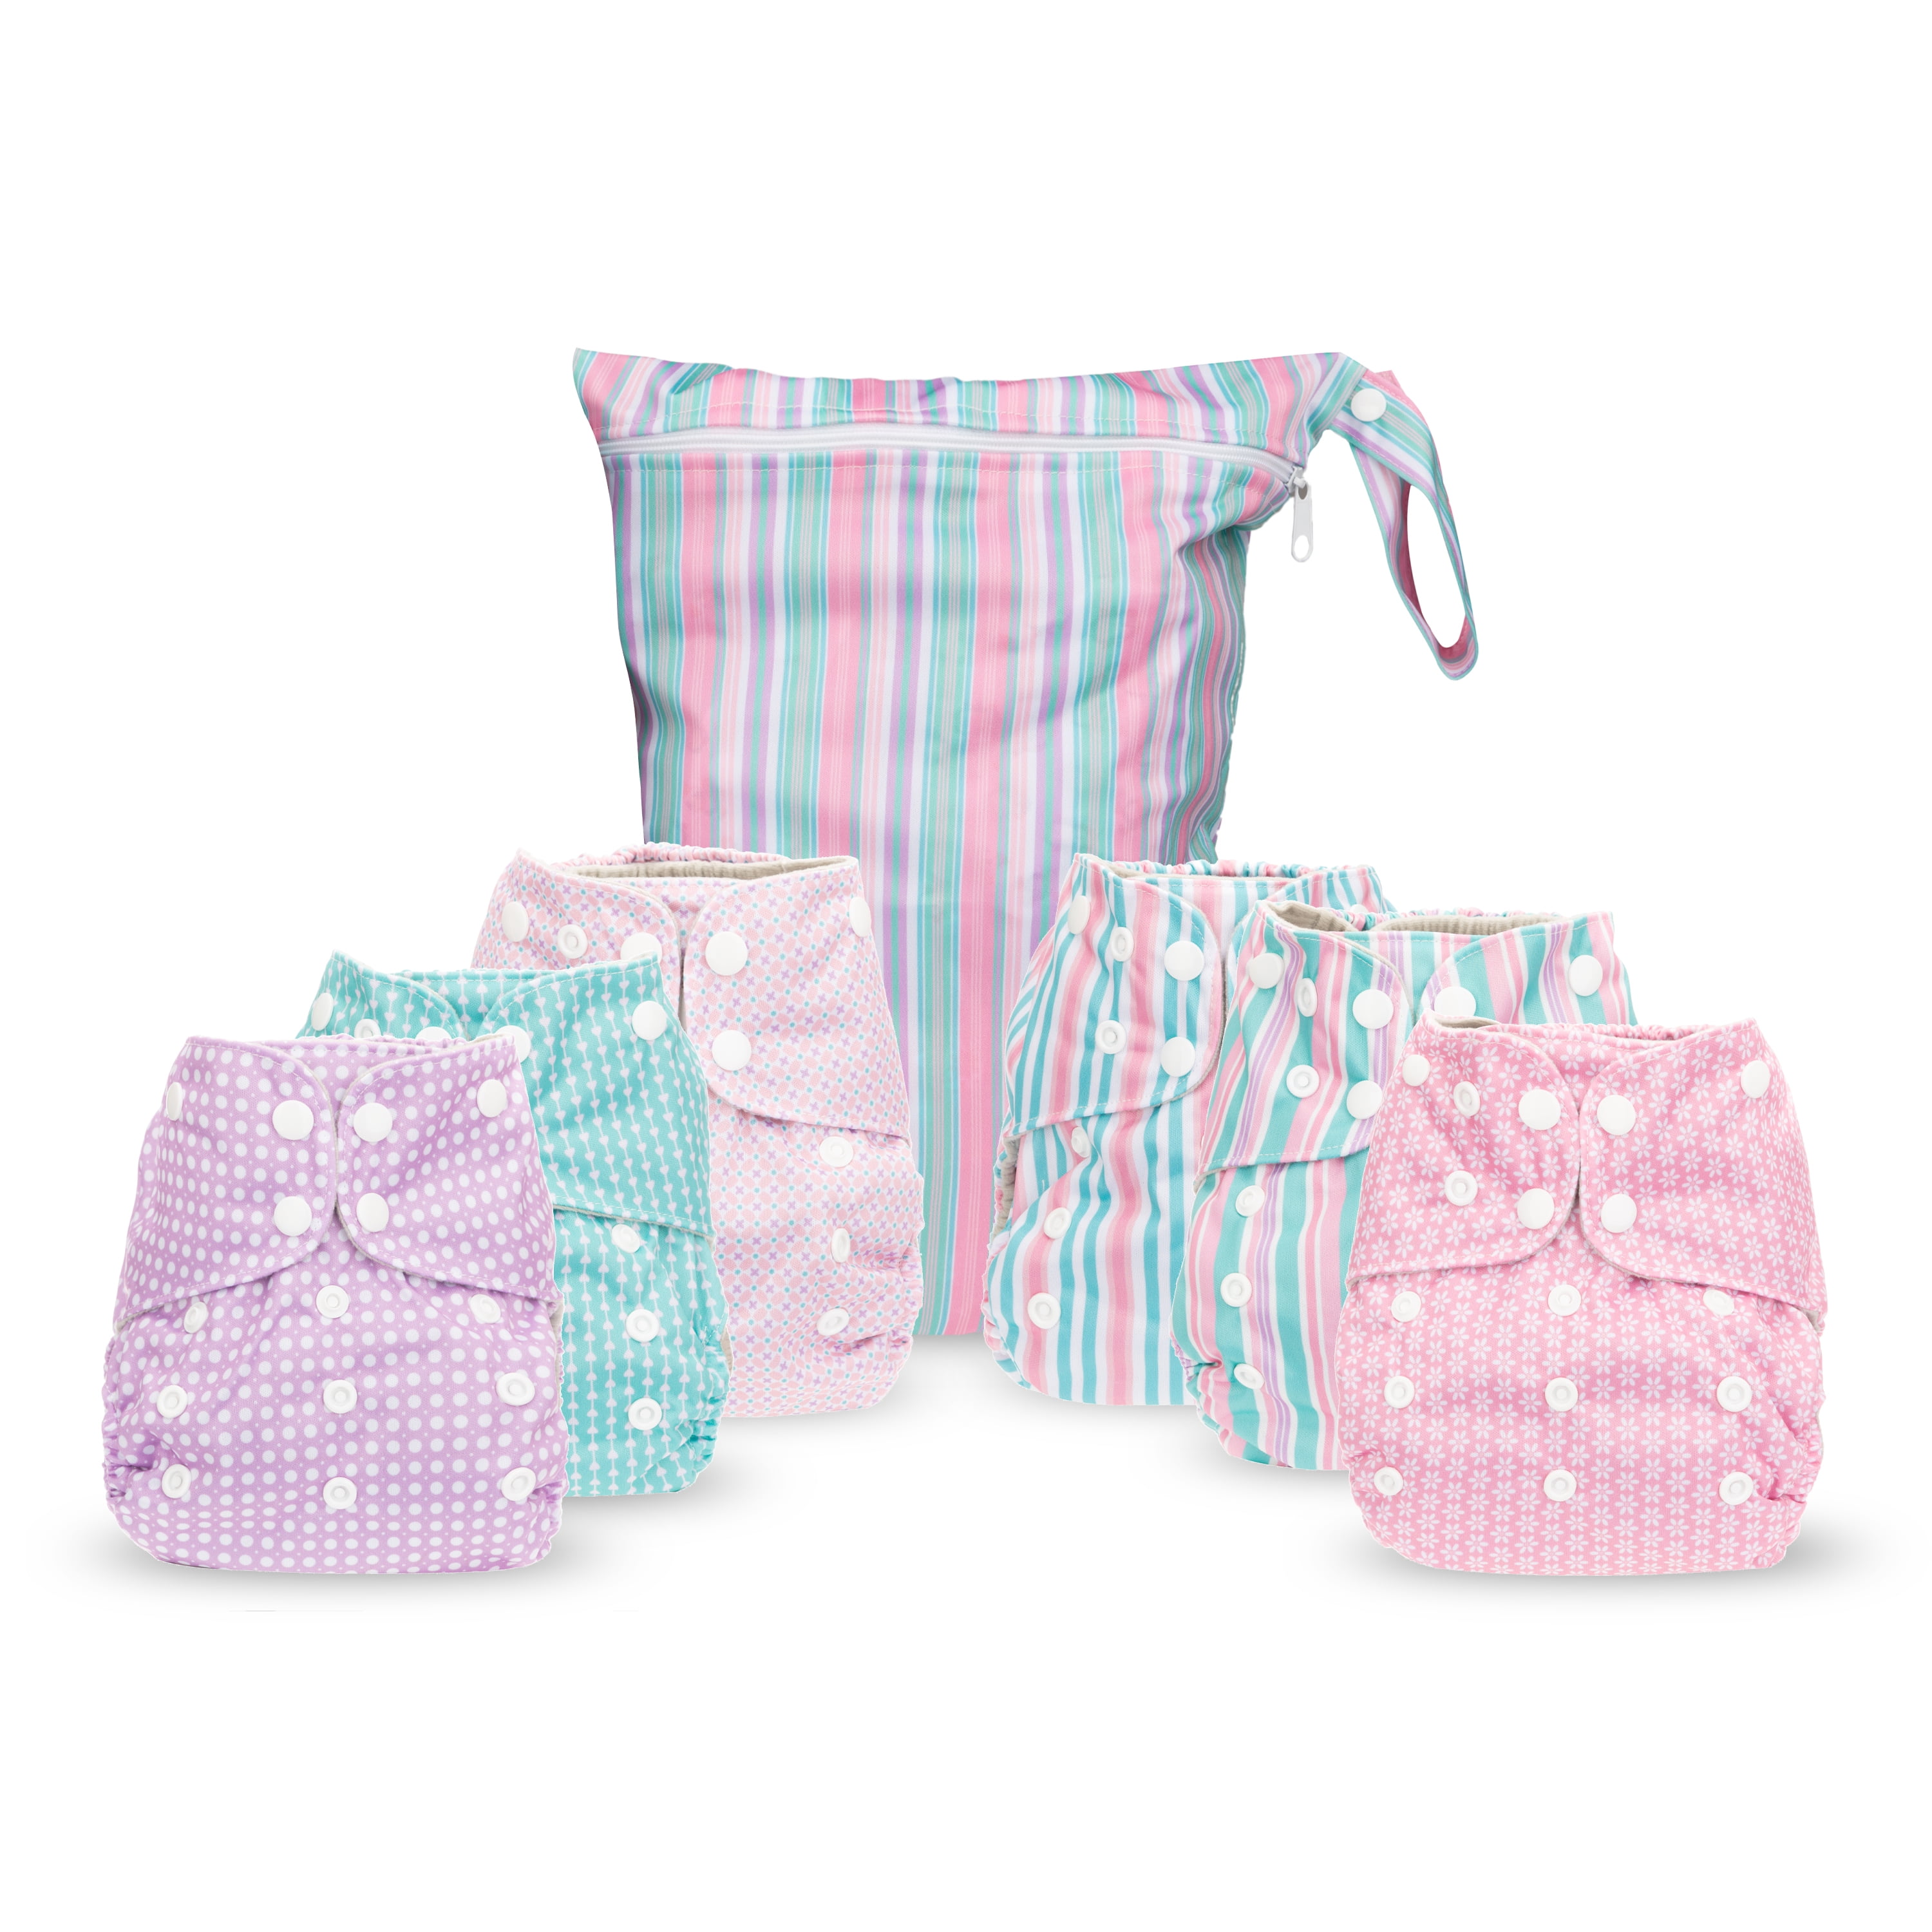 6 Washable Inserts for Leakproof Protection A Set of 6 Pcs Berries 8-35lbs+ Environmentally Friendly Reusable Cloth Baby Diapers for Boys & Girls - - Double Pockets Gentle on Baby Skin PINK & BLUE